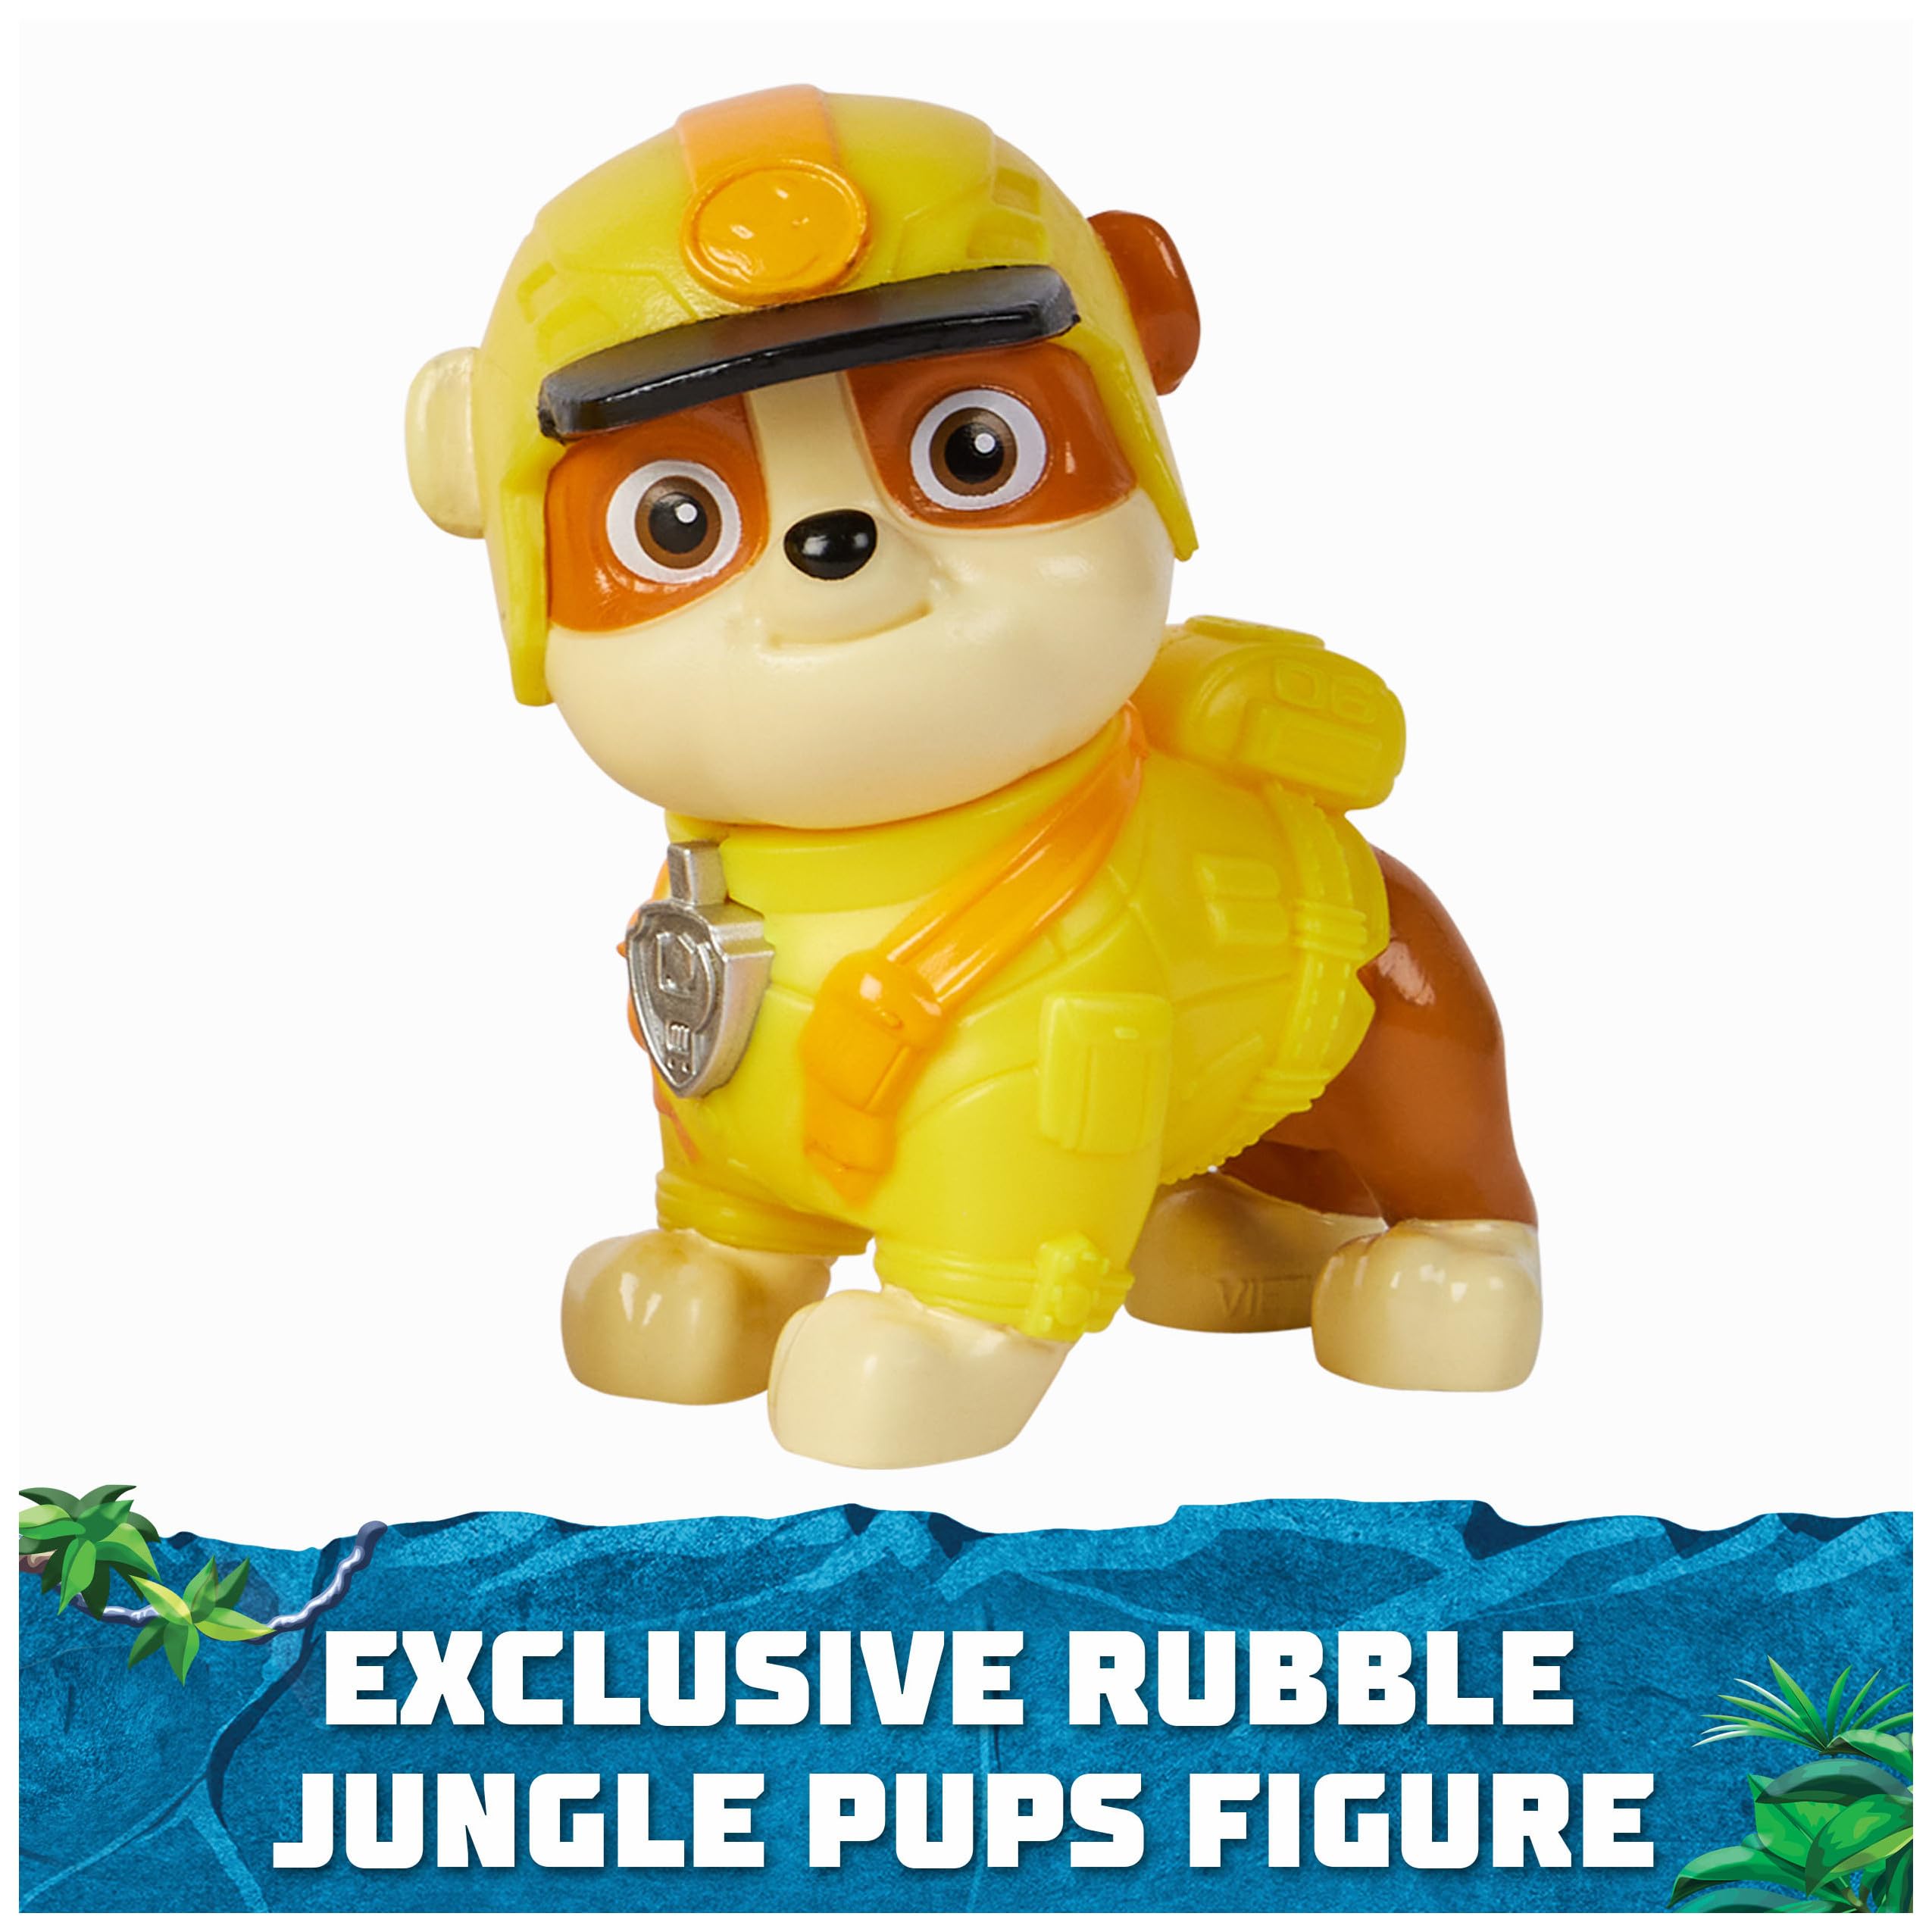 PAW Patrol Jungle Pups, Rubble Rhino Vehicle, Toy Truck with Collectible Action Figure, Kids Toys for Boys & Girls Ages 3 and Up